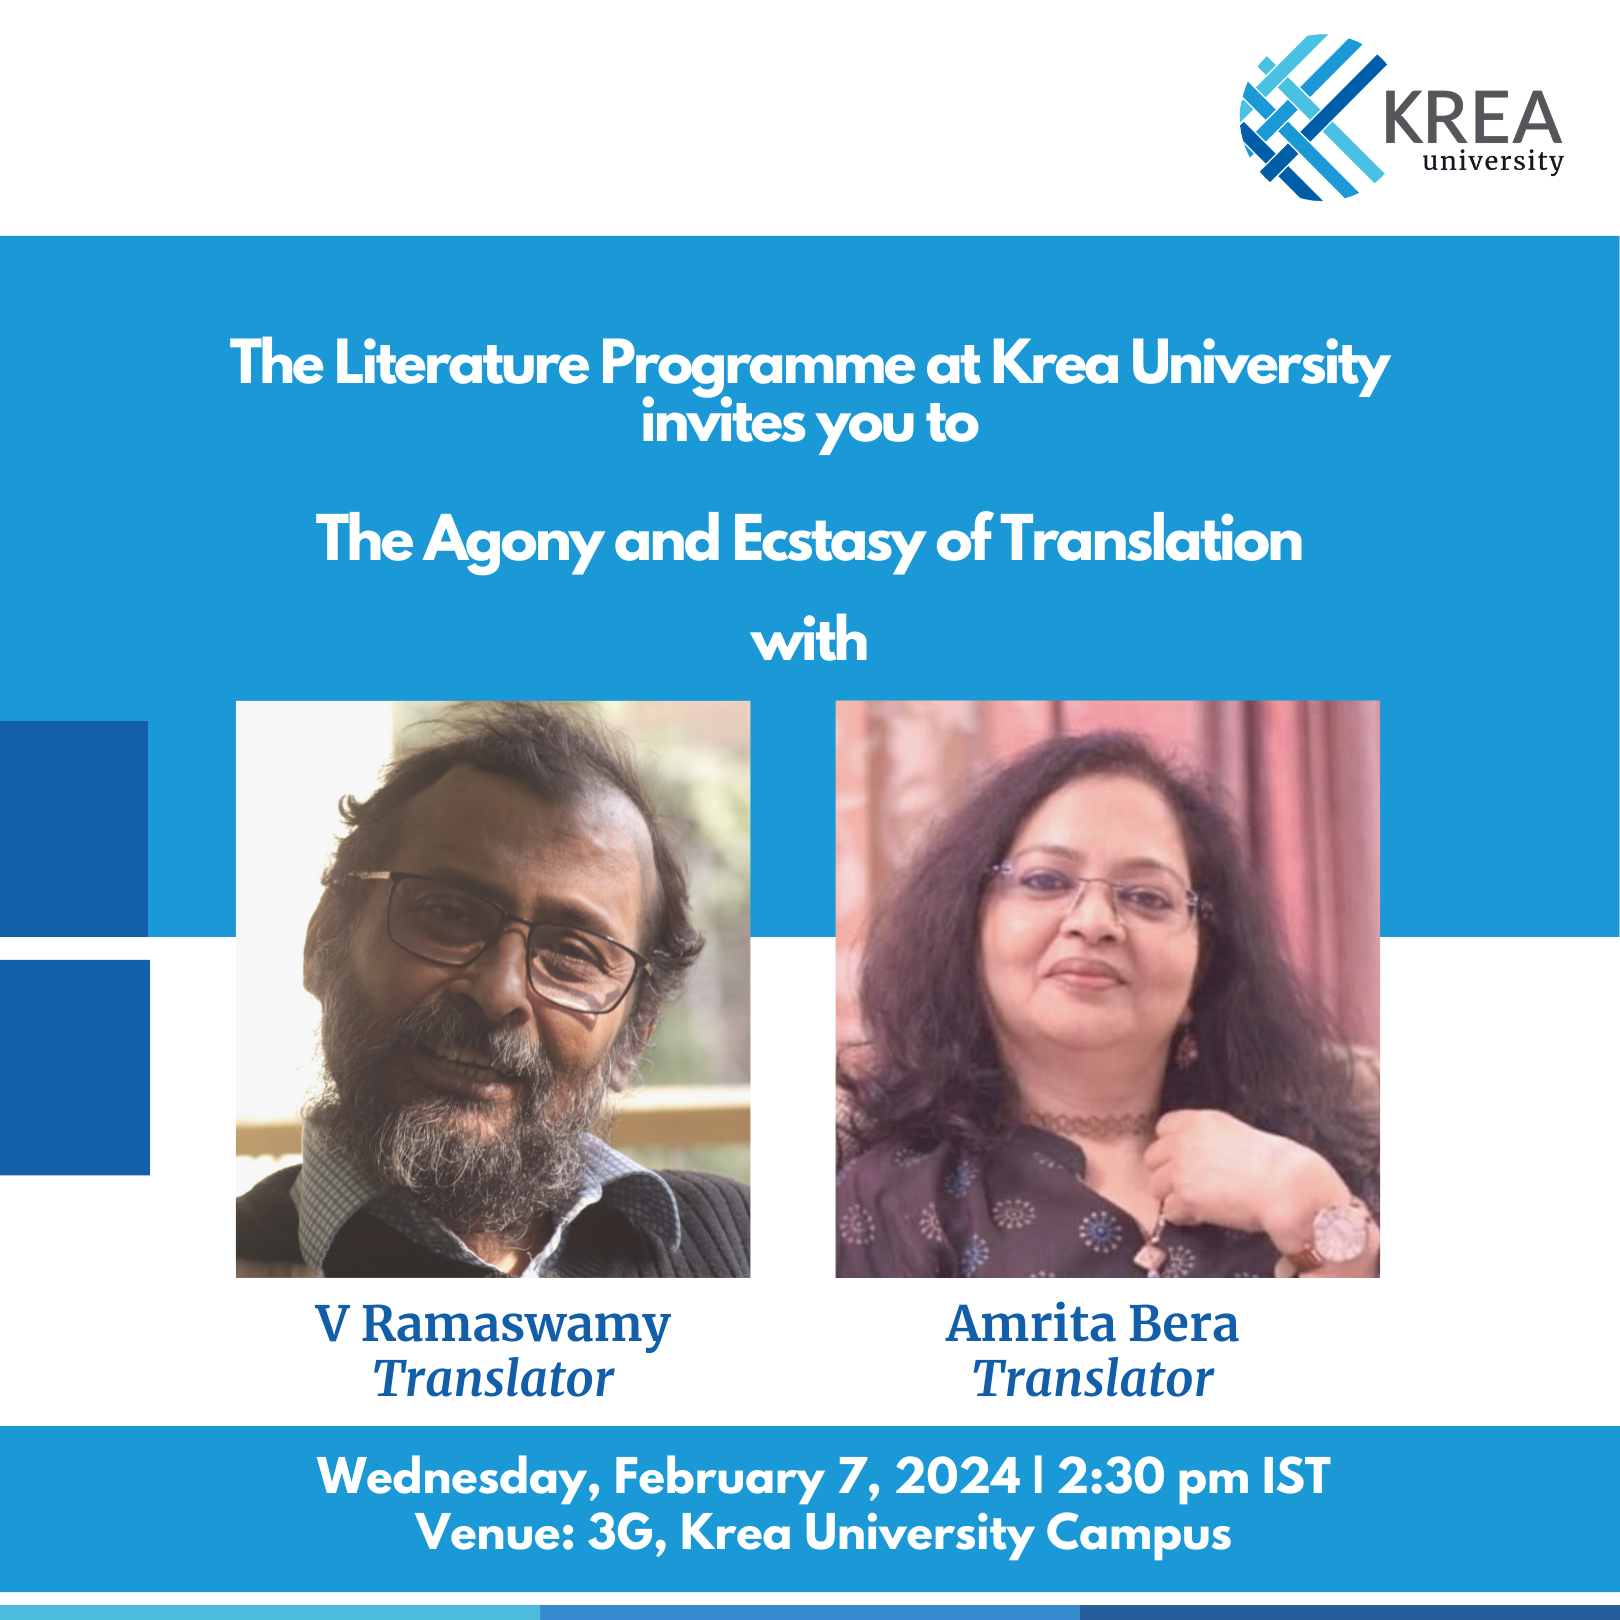 A Session on The Agony and Ecstasy of Translation with V Ramaswamy and Amrita Bera